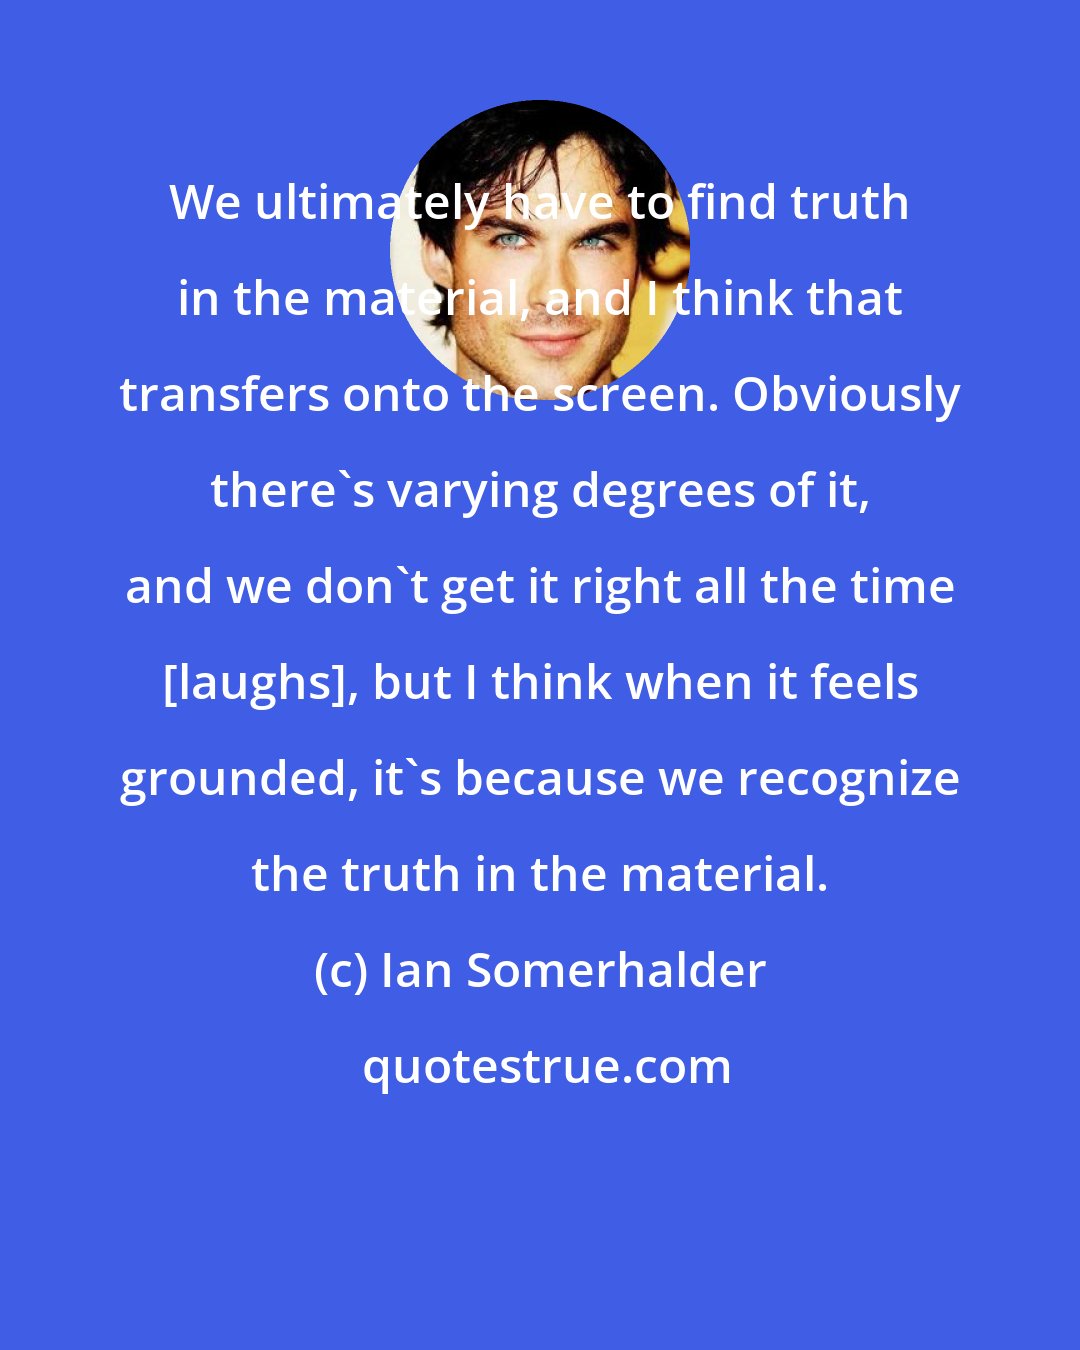 Ian Somerhalder: We ultimately have to find truth in the material, and I think that transfers onto the screen. Obviously there's varying degrees of it, and we don't get it right all the time [laughs], but I think when it feels grounded, it's because we recognize the truth in the material.